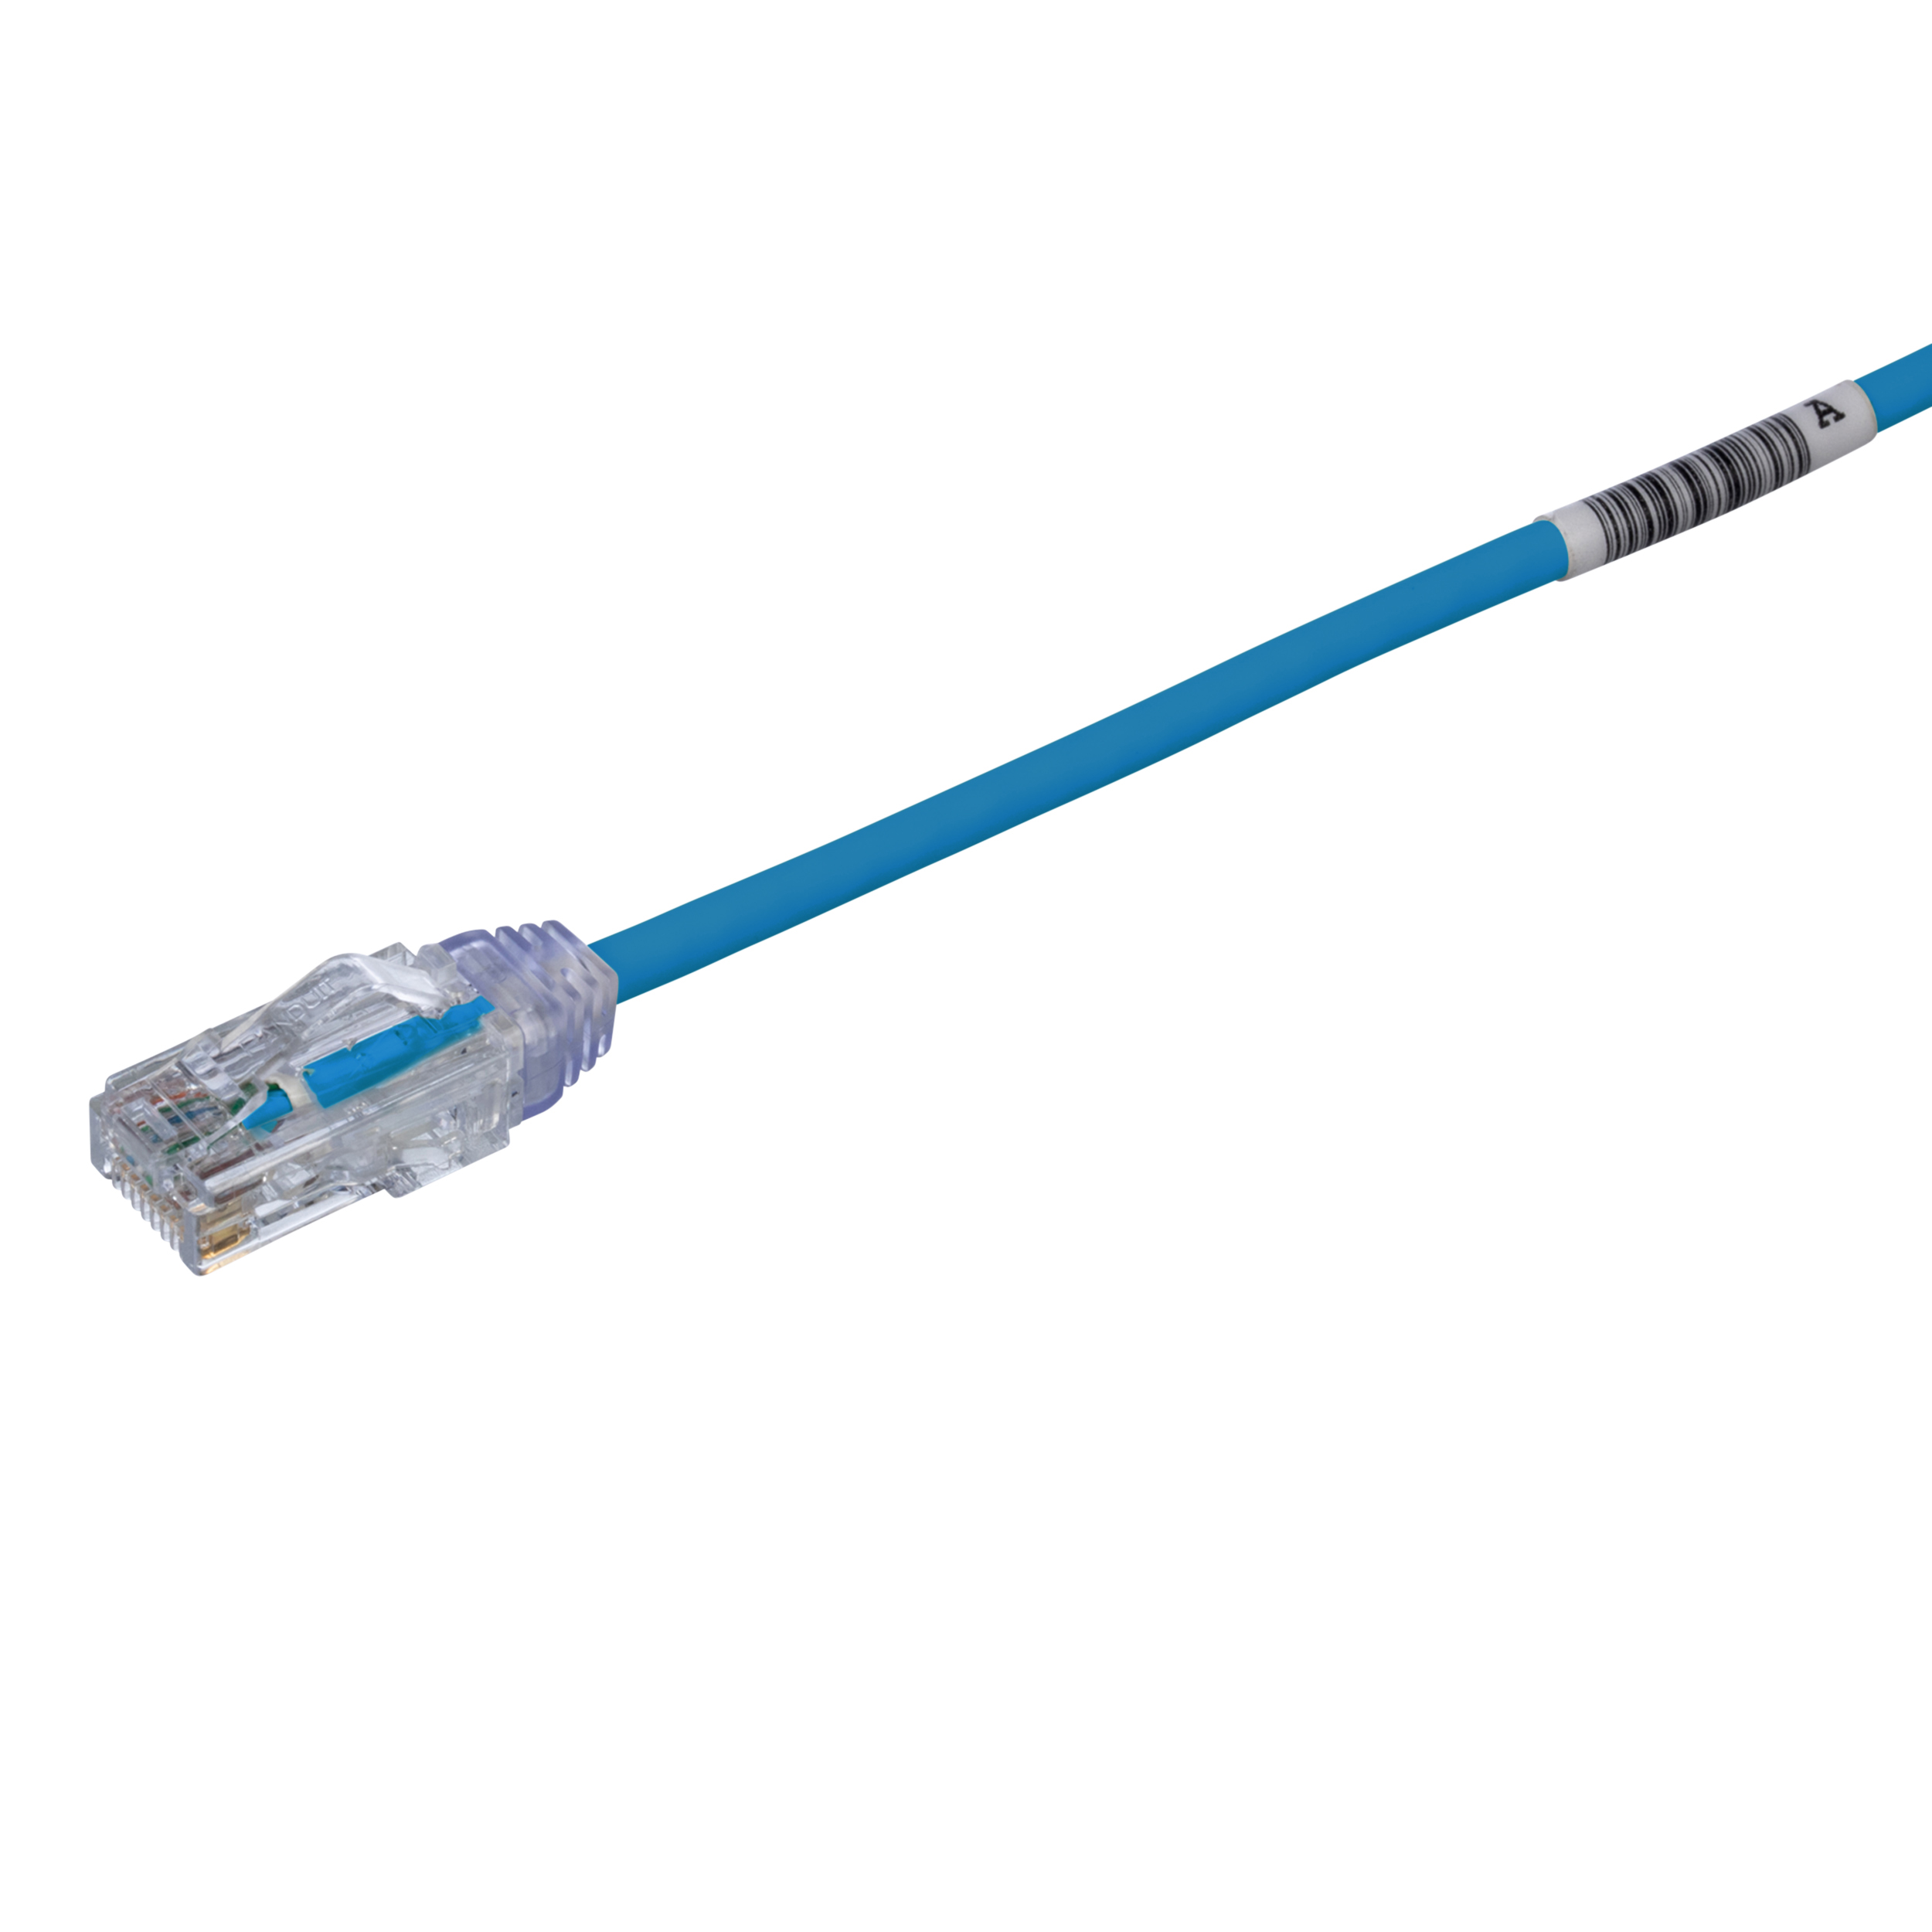 Cat 6 28 AWG UTP Copper Patch Cord, 25 ft, Blue